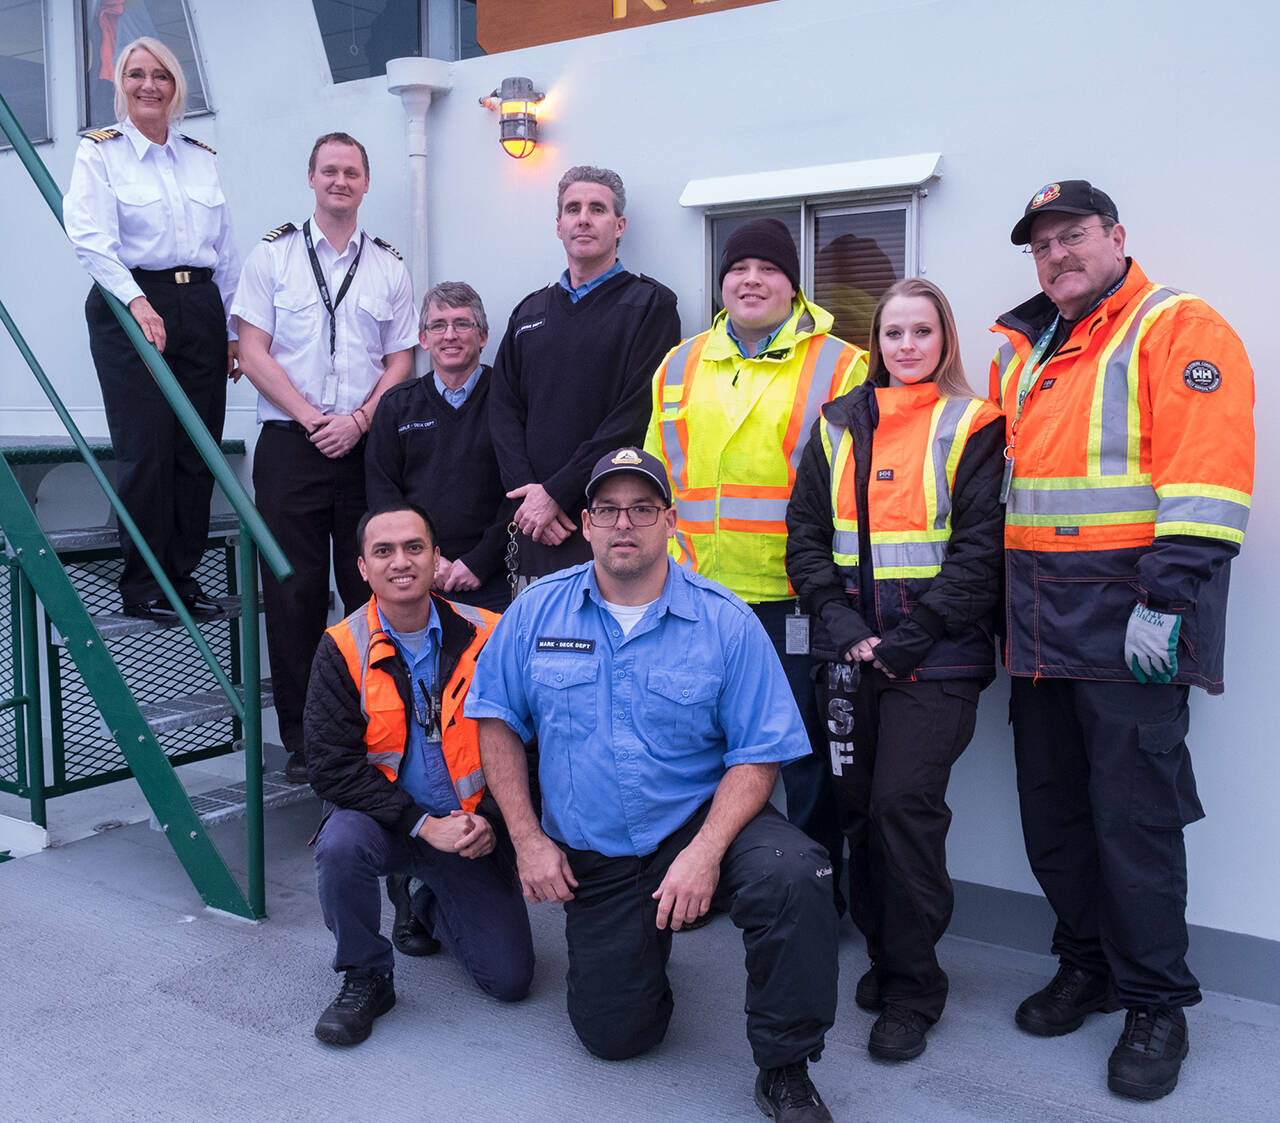 (Terry Donnelly Photo) Captain Marsha Morse, far left at the top of the stairs, and her crew, photographed aboard the MV Kitsap.